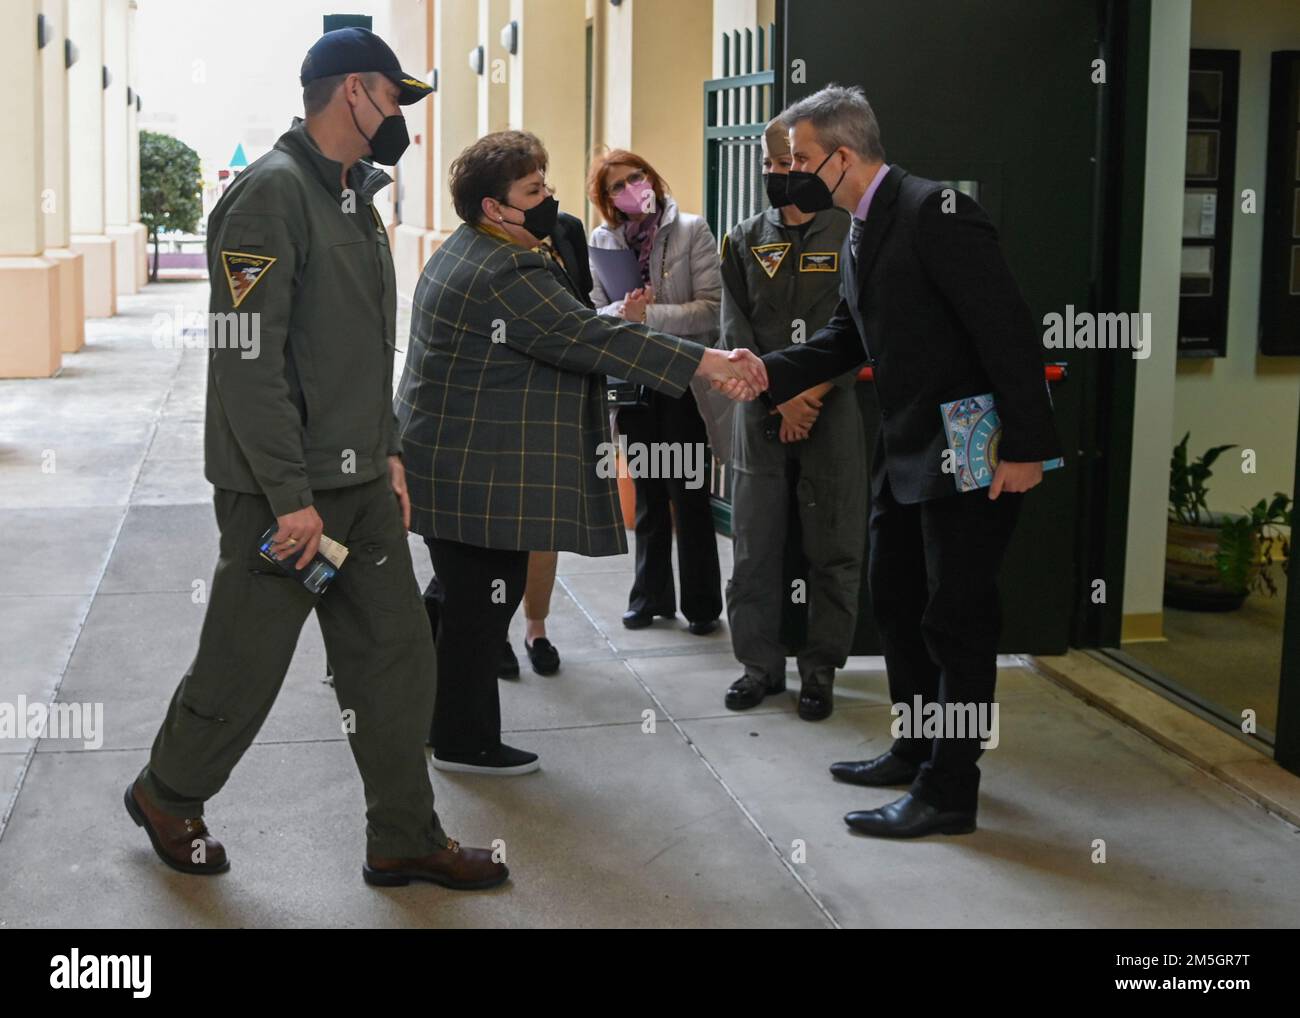 220317-N-GK686-2132 NAVAL AIR STATION SIGONELLA, Italy (March 17, 2022) – Marc Villarreal, Sigonella Middle/High School principal, left, greets Mrs. Betty Del Toro, wife of the secretary of the Navy, before a look at the school as part of a tour of Naval Air Station Sigonella, March 17, 2022. NAS Sigonella’s strategic location enables U.S., allied, and partner nation forces to deploy and respond as required, ensuring security and stability in Europe, Africa, and Central Command. Stock Photo